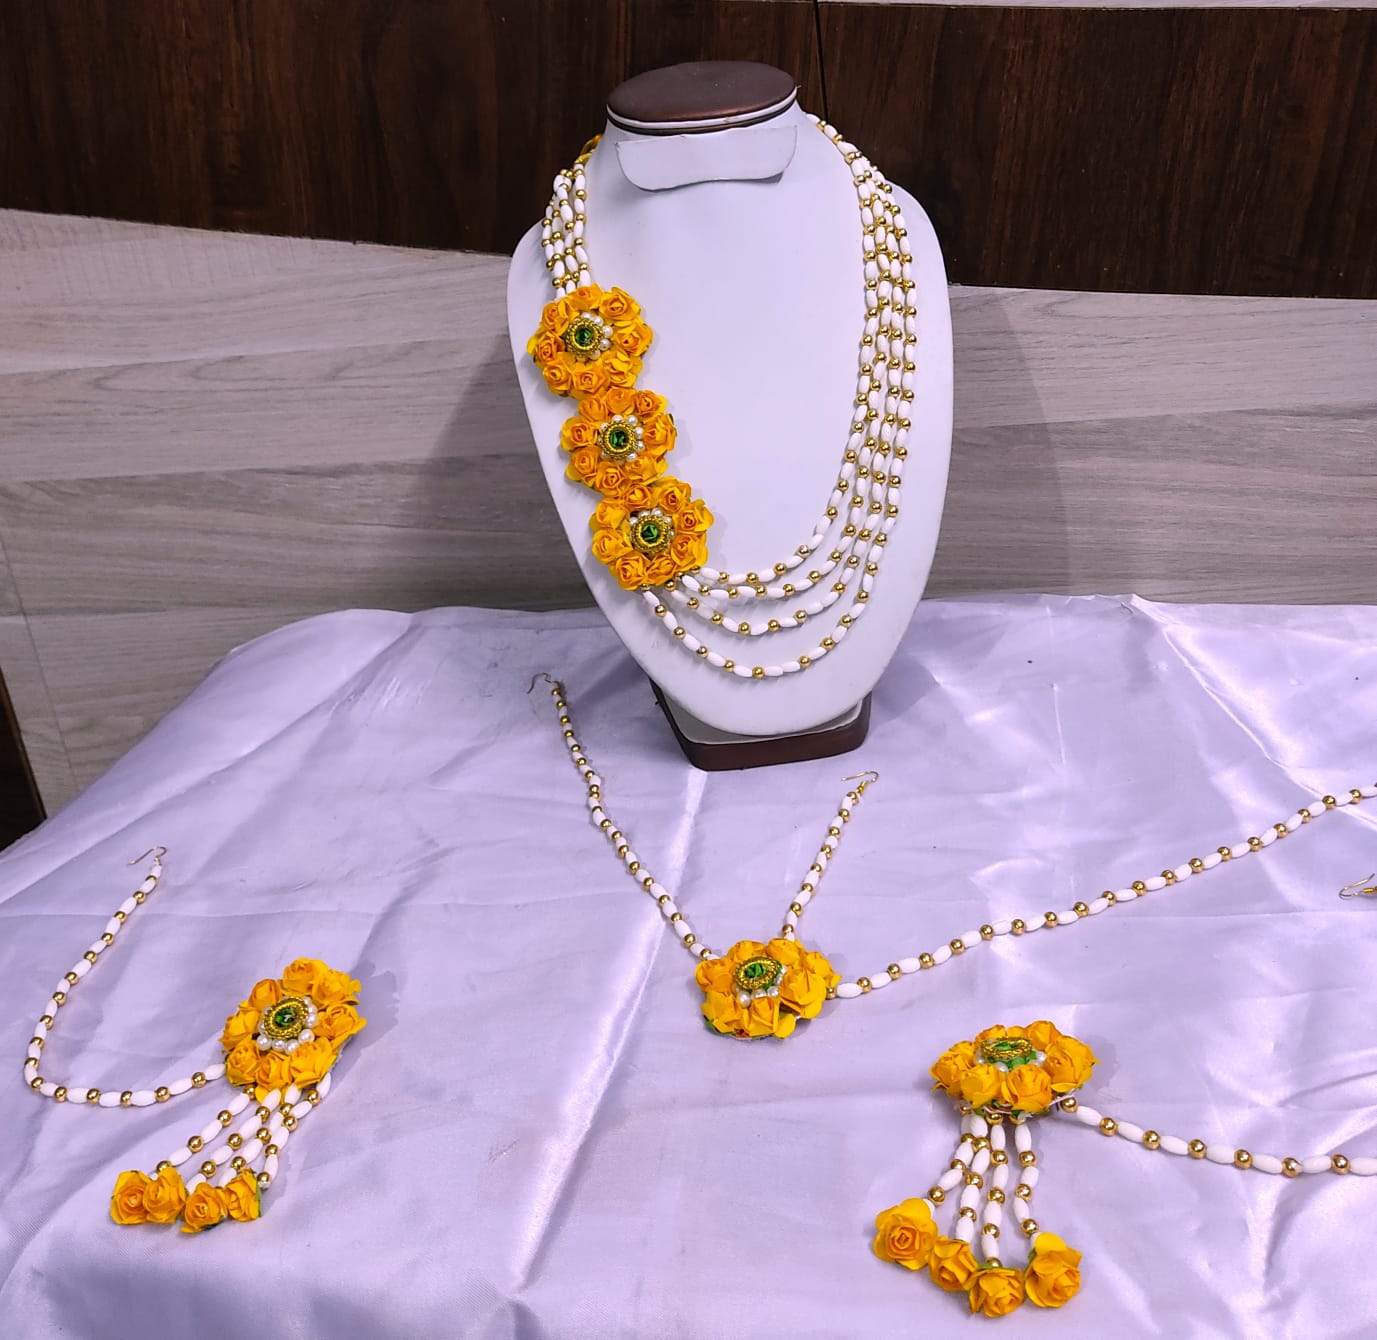 Lamansh Flower Jewellery set 1 Necklace, 2 Earrings with extended clips,1 Maangtika with Side Chain set / Yellow-White LAMANSH® Designer Floral Jewellery Set for Women & Girls